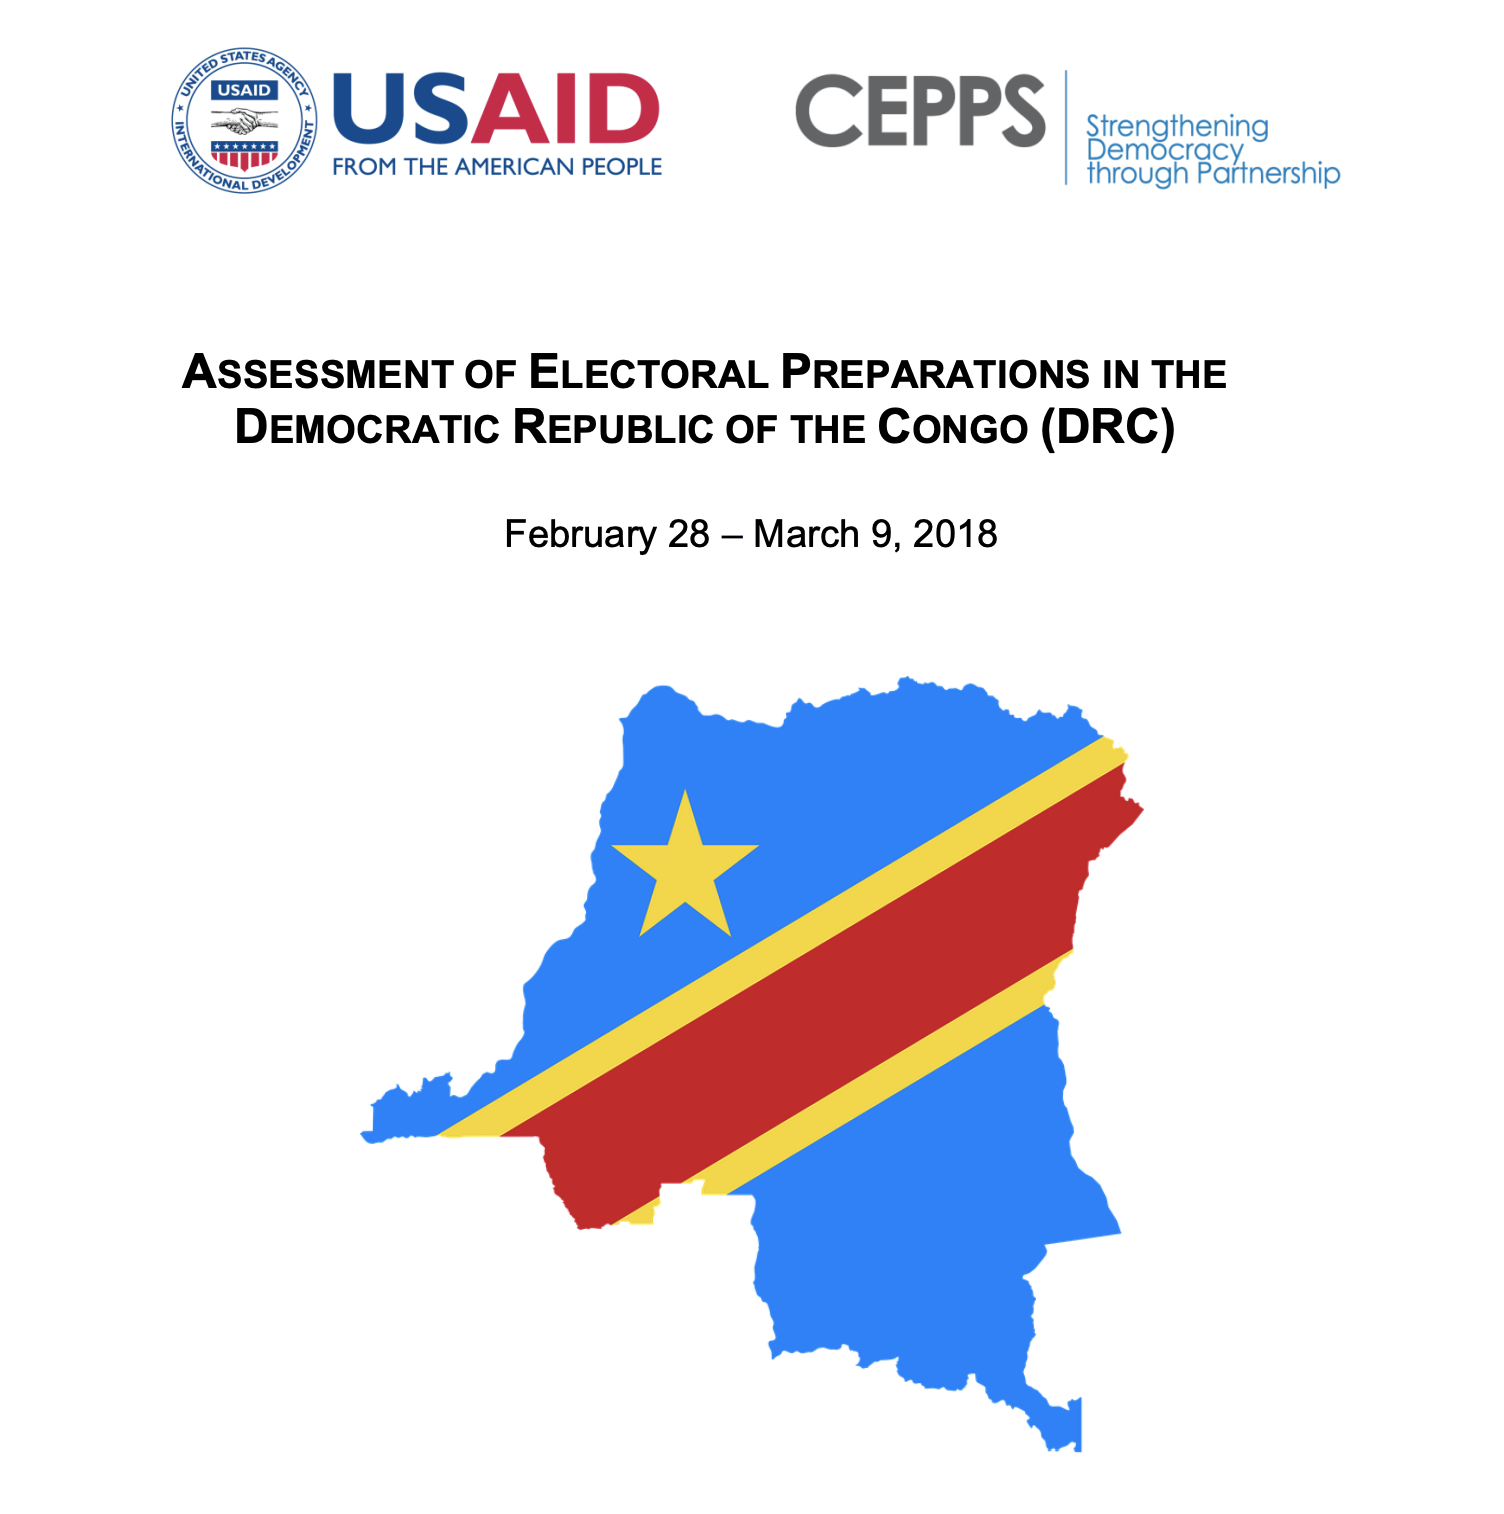 ASSESSMENT OF ELECTORAL PREPARATIONS IN THE DEMOCRATIC REPUBLIC OF THE CONGO (DRC) February 28 – March 9, 2018